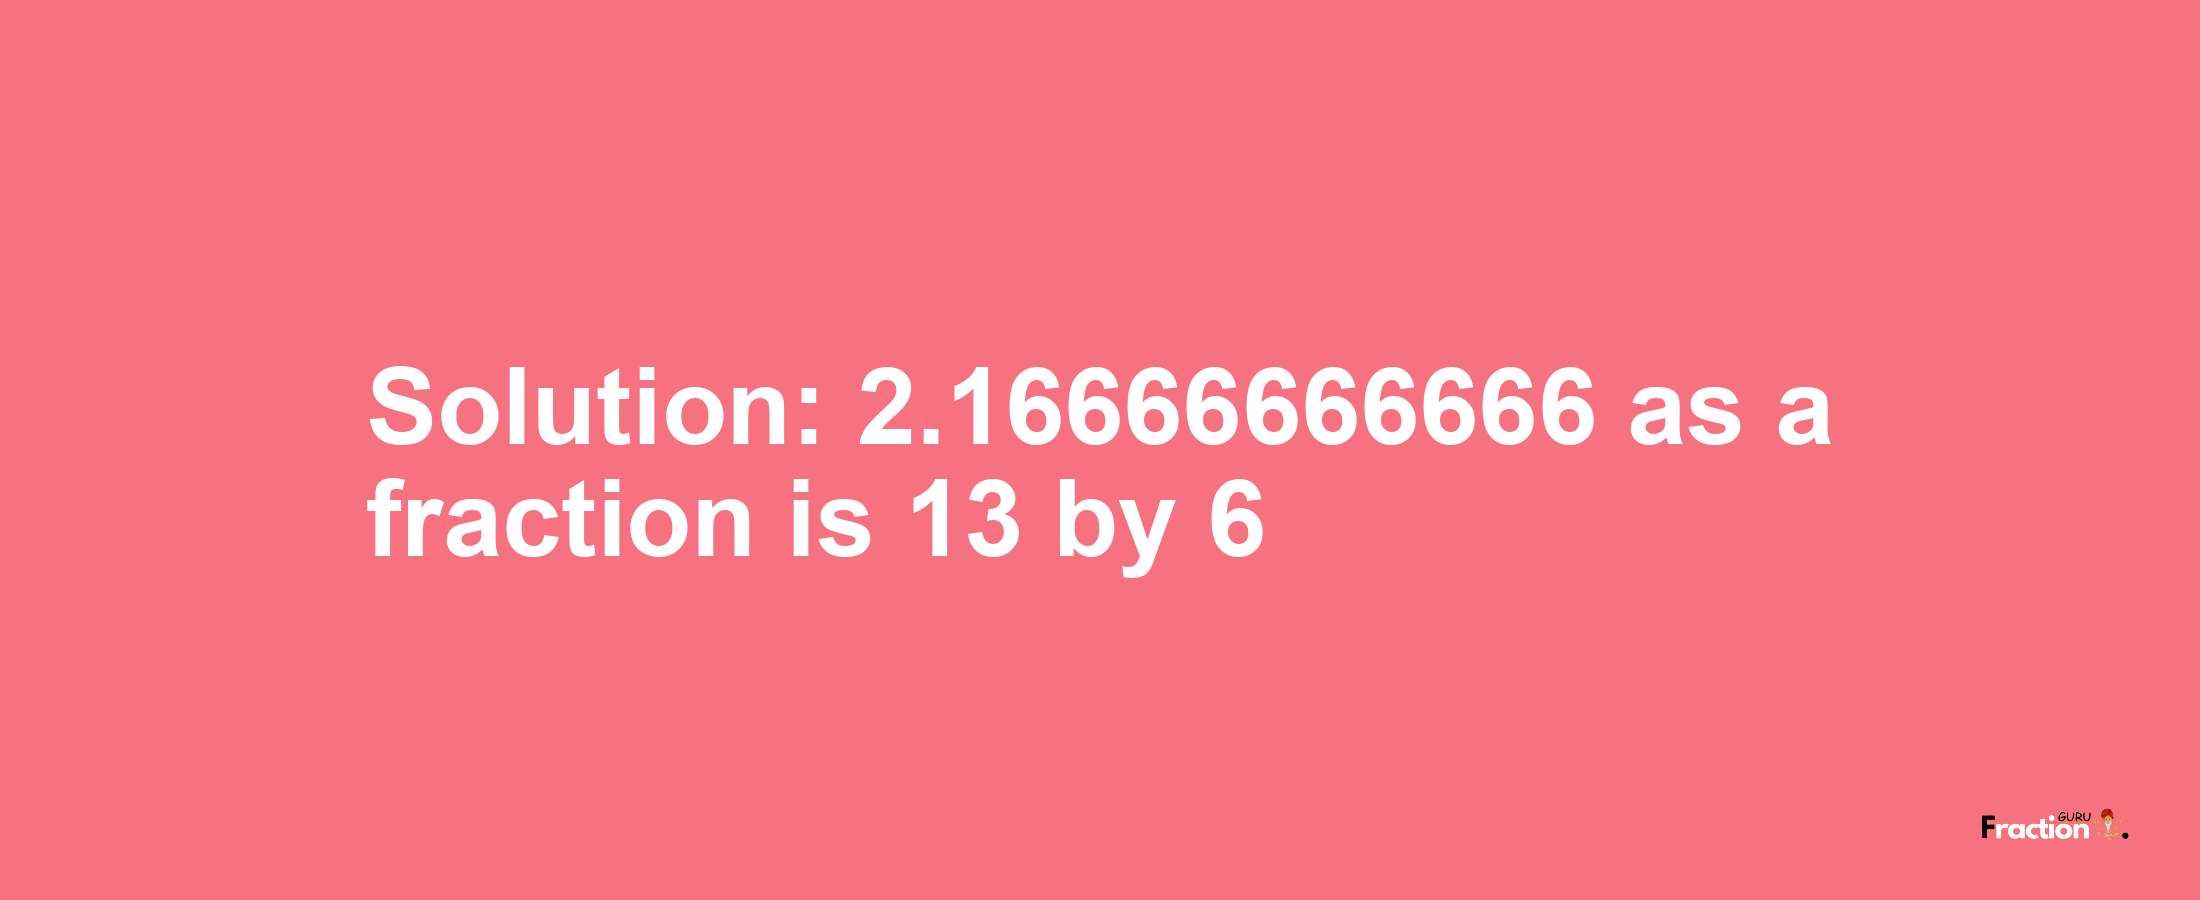 Solution:2.16666666666 as a fraction is 13/6